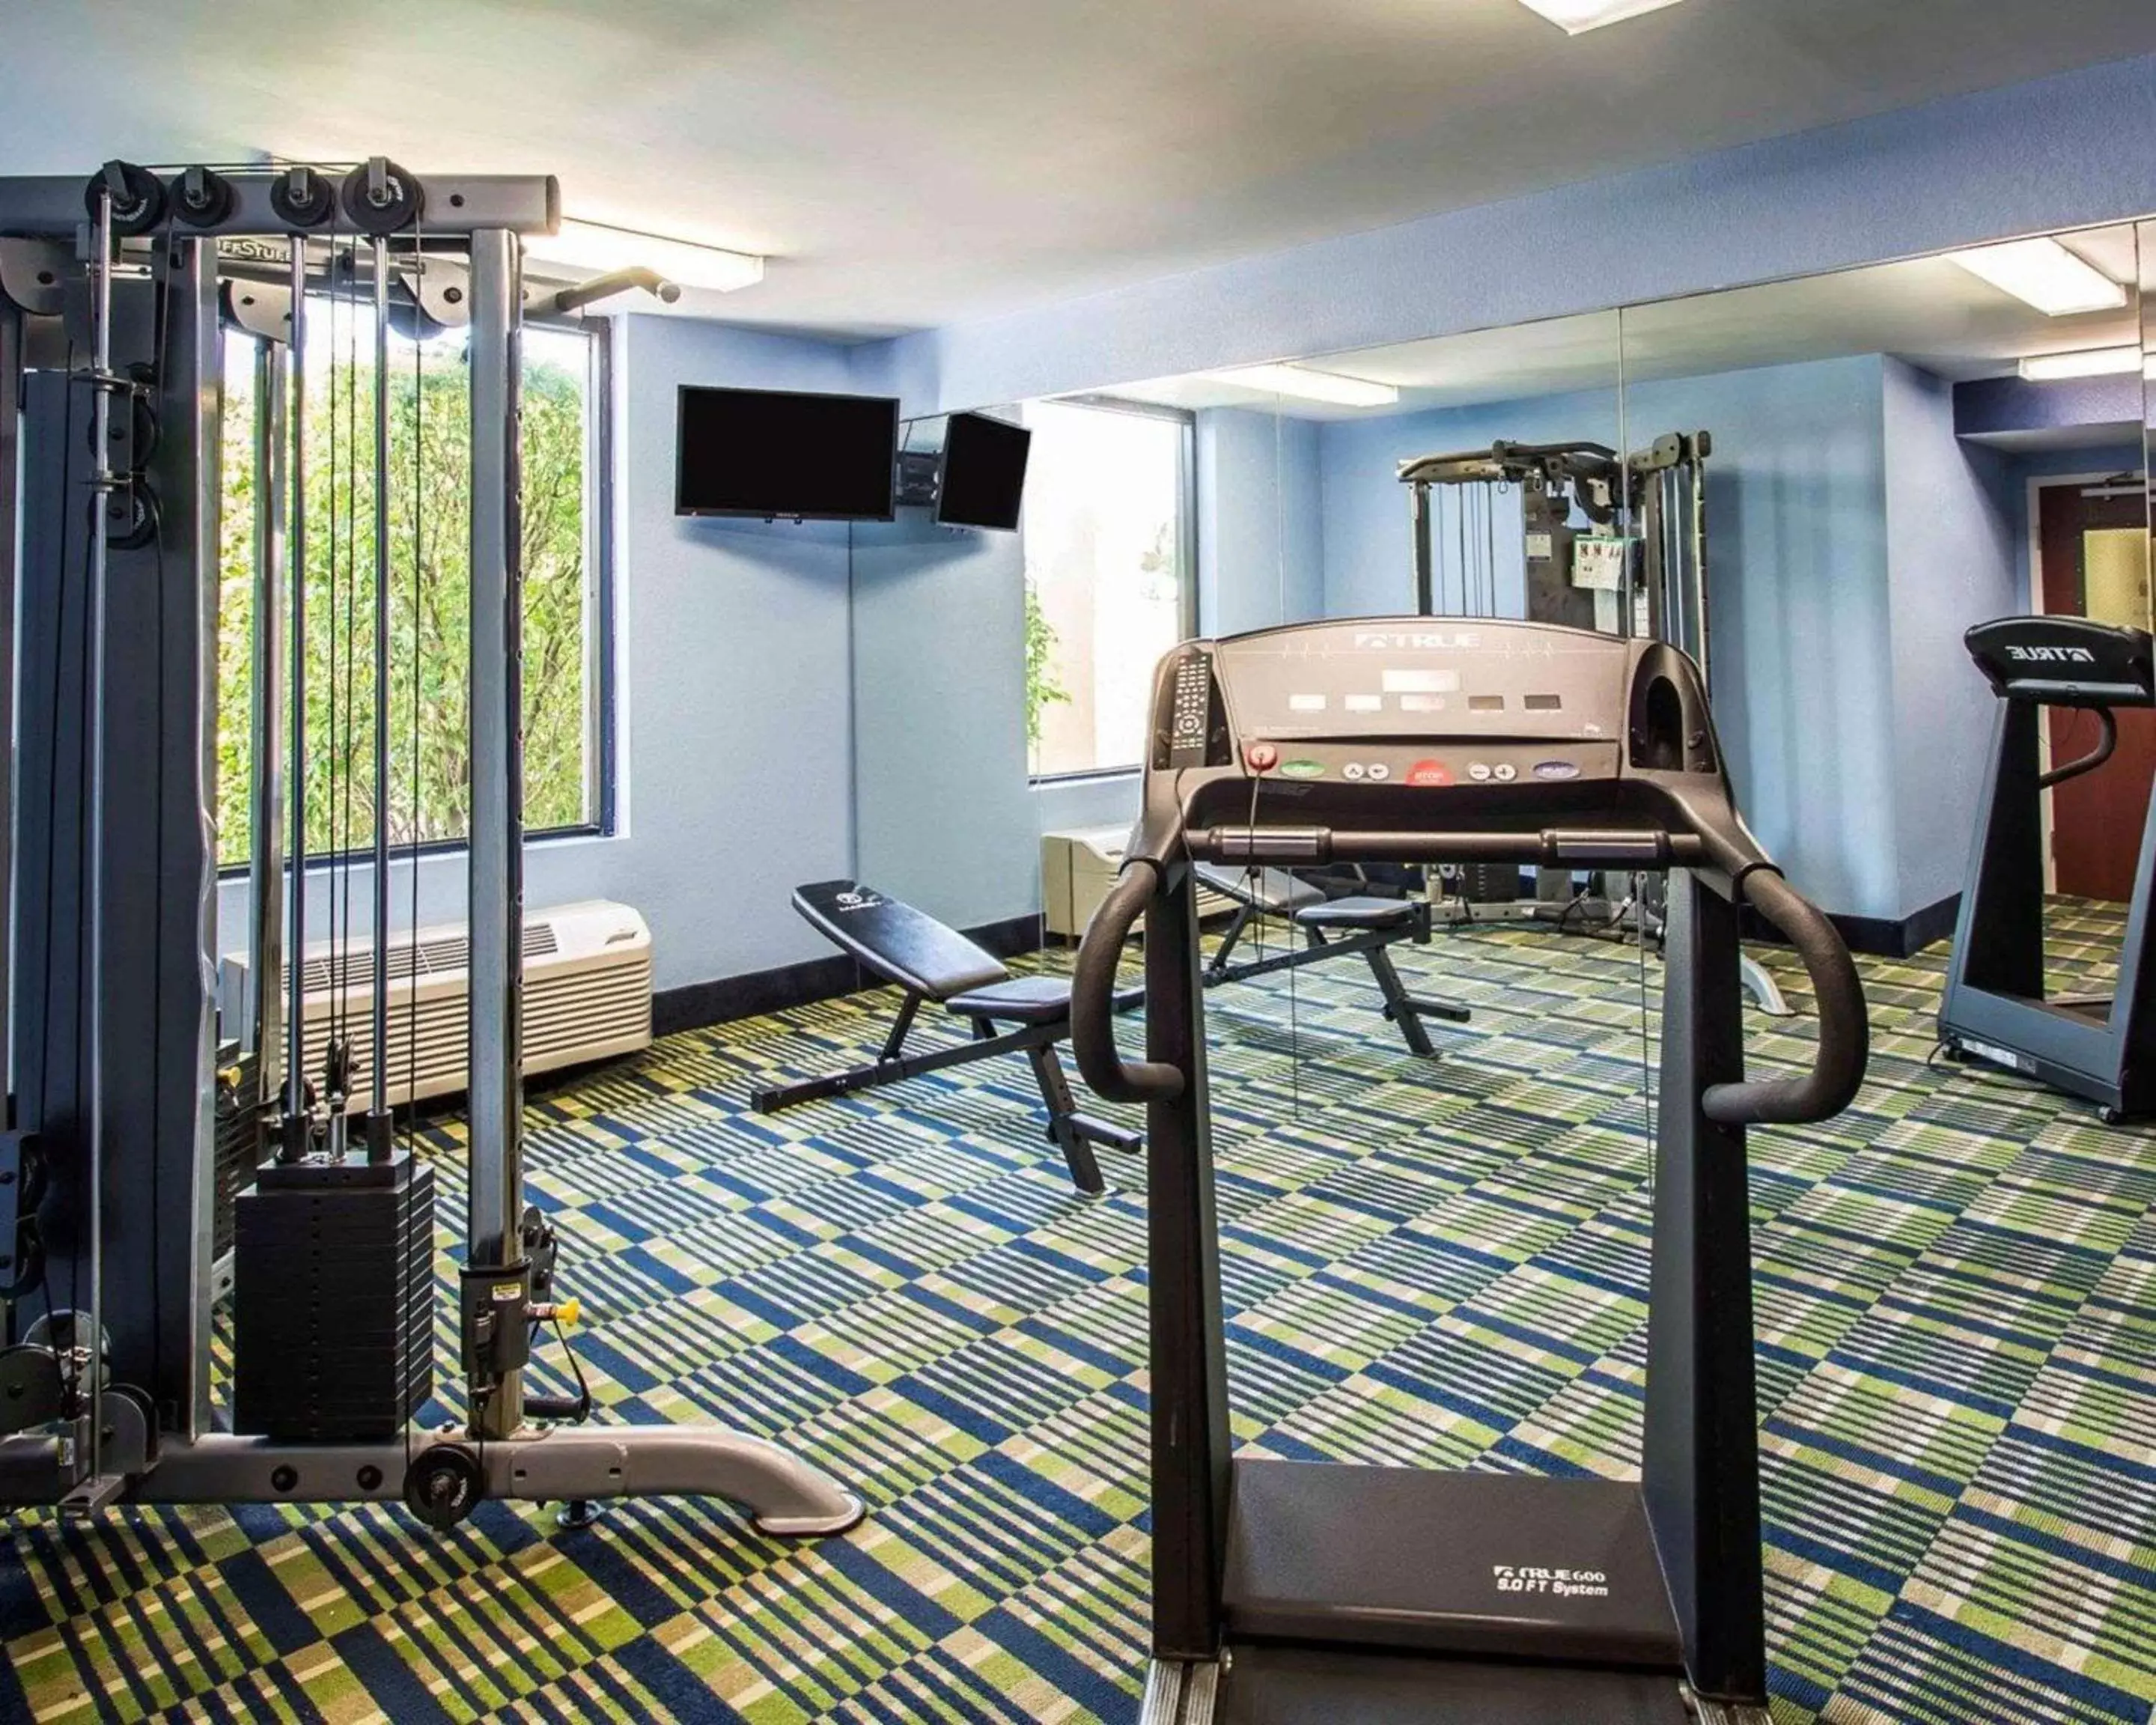 Fitness centre/facilities, Fitness Center/Facilities in Comfort Inn & Suites - Lantana - West Palm Beach South